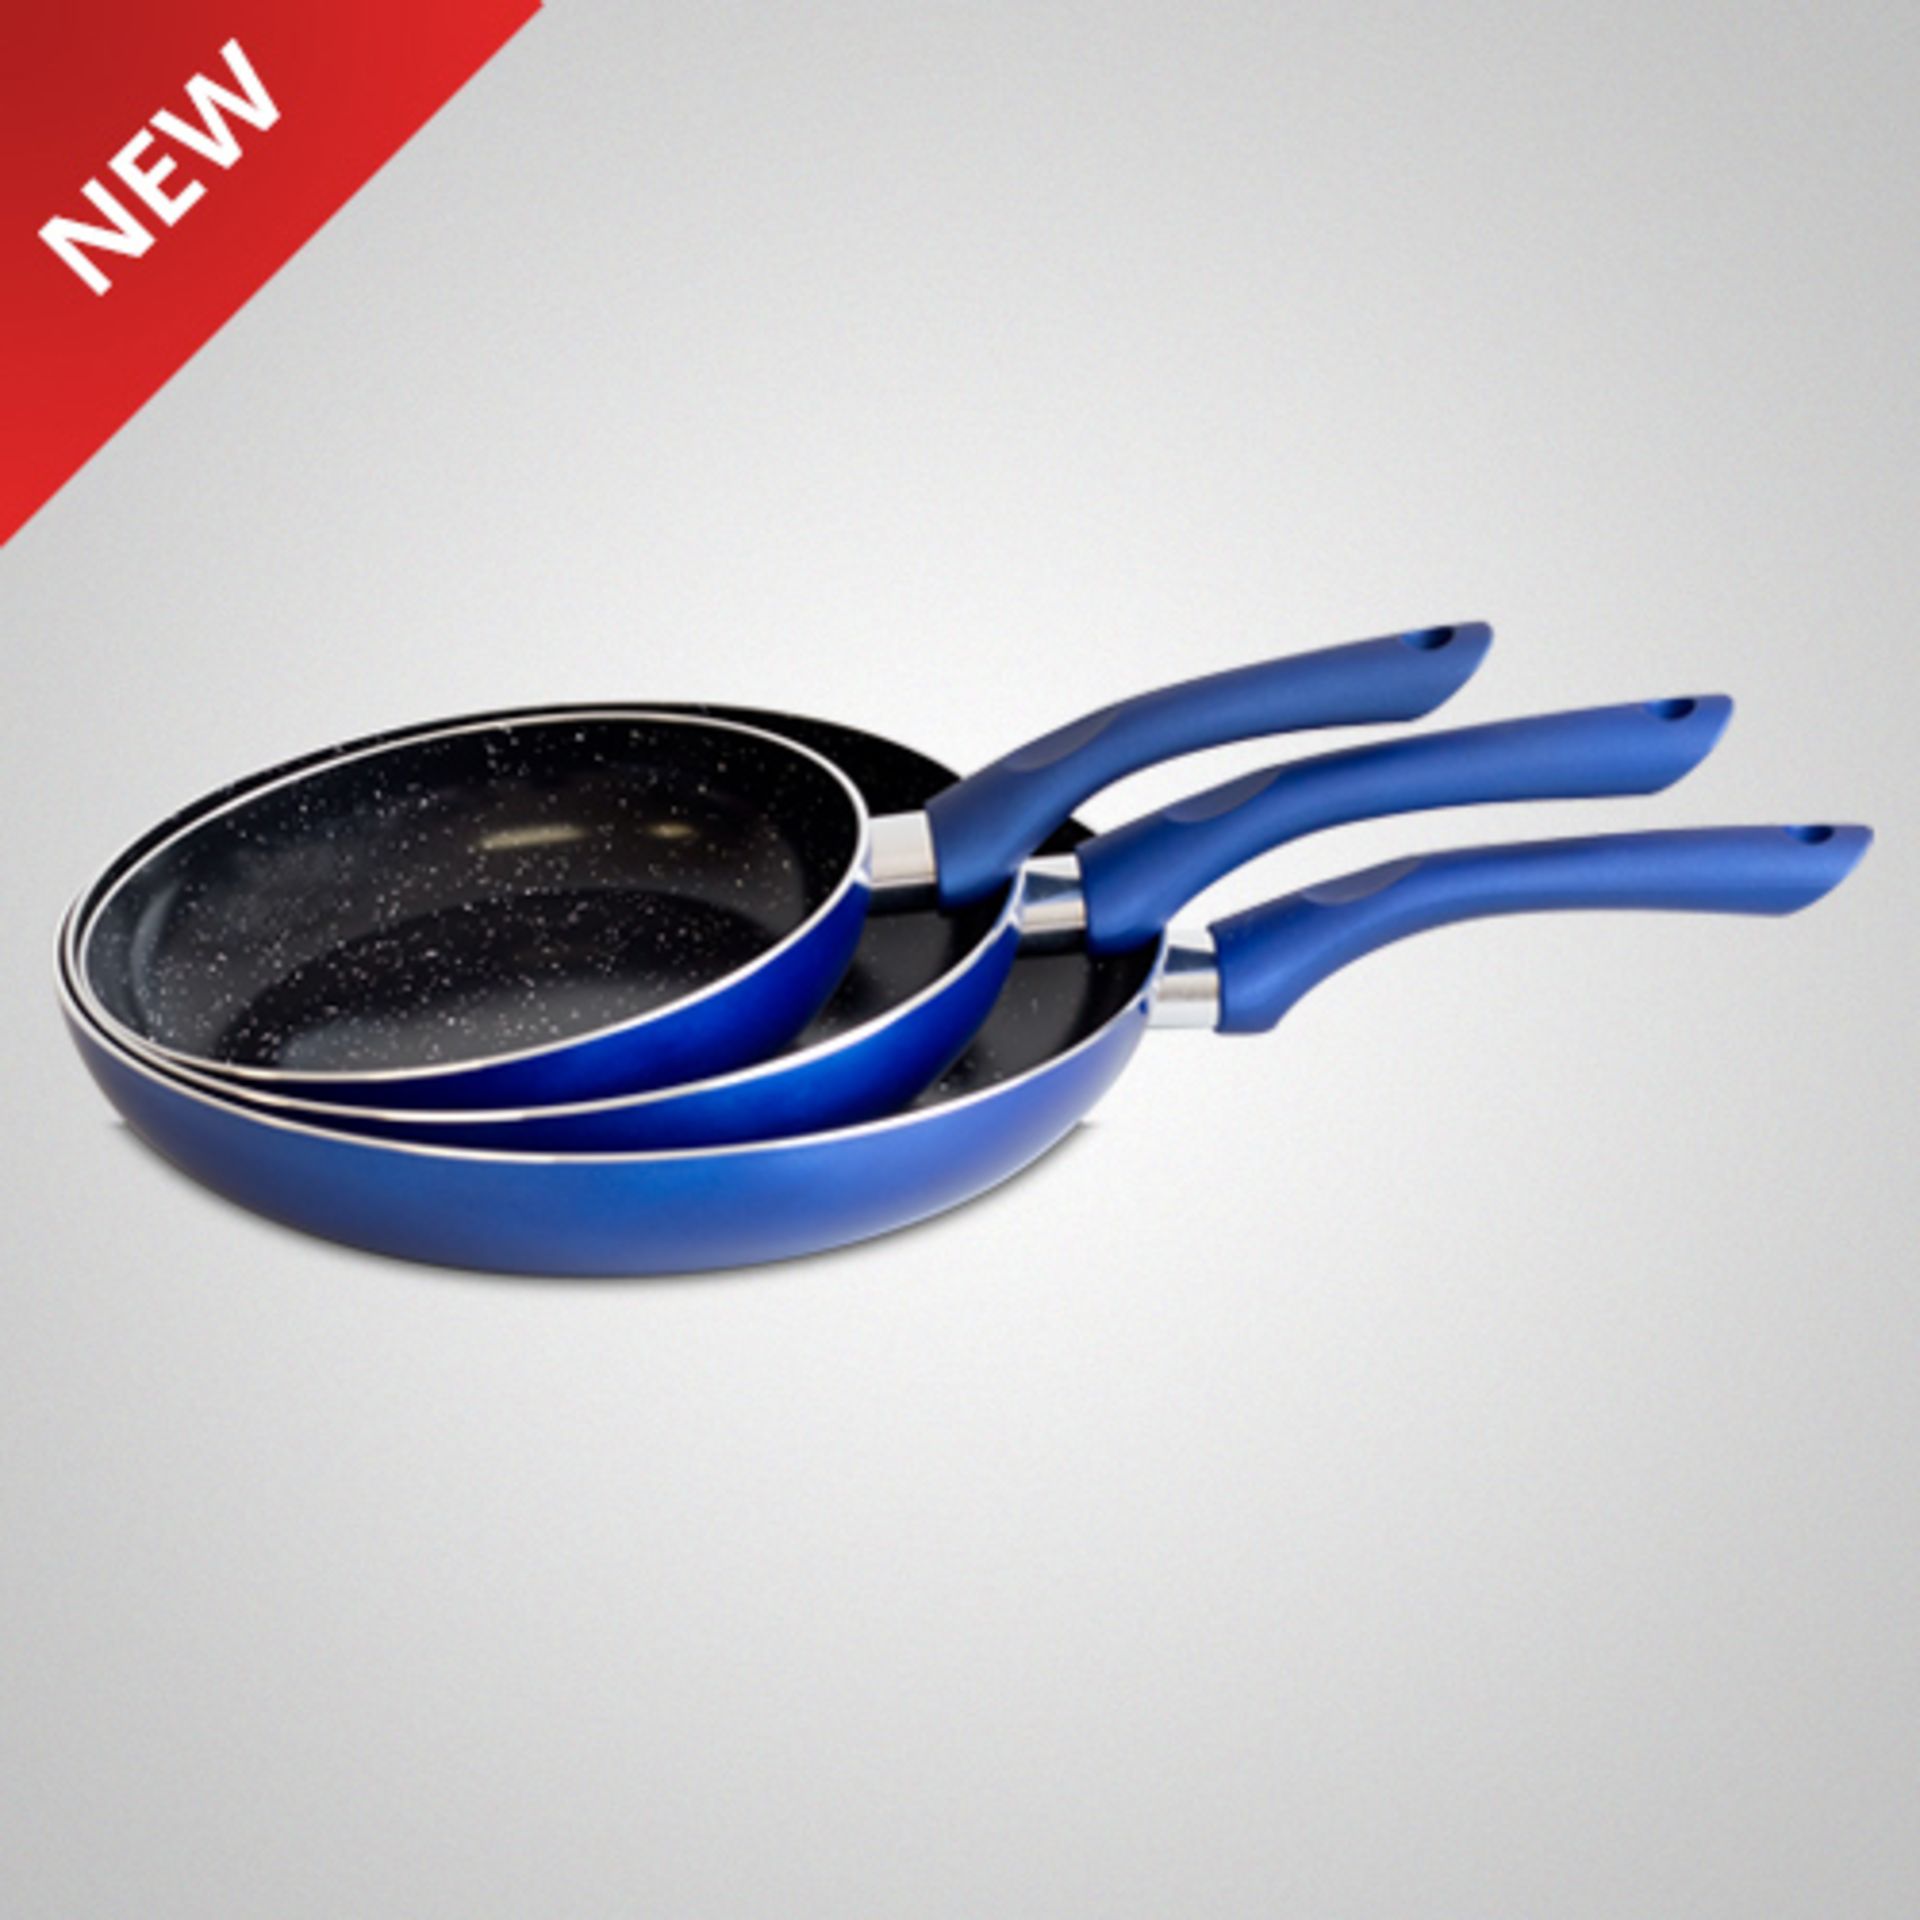 V Brand New Set Of 3 Non Stick Frying Pans Soft Touch Handle Blue RRP 99Euros